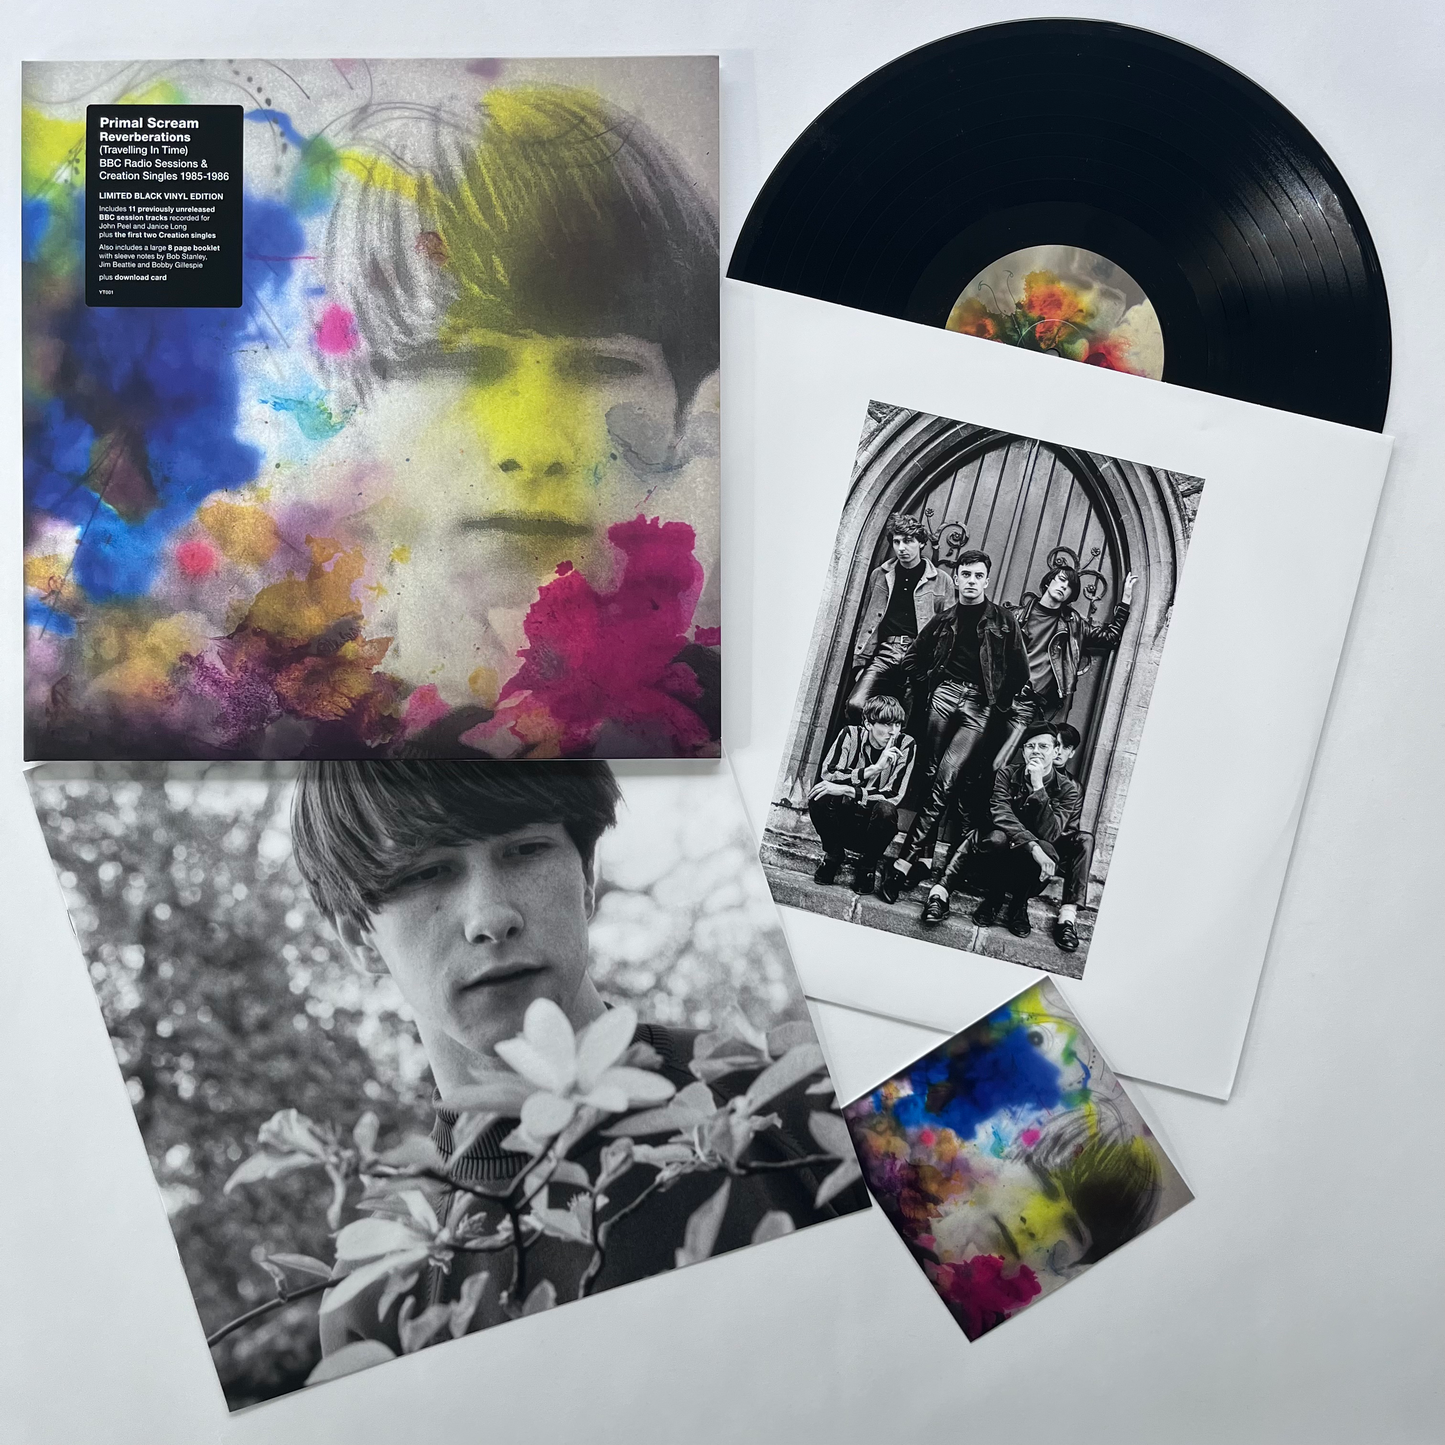 Reverberations (Travelling In Time) Limited Edition Black Vinyl